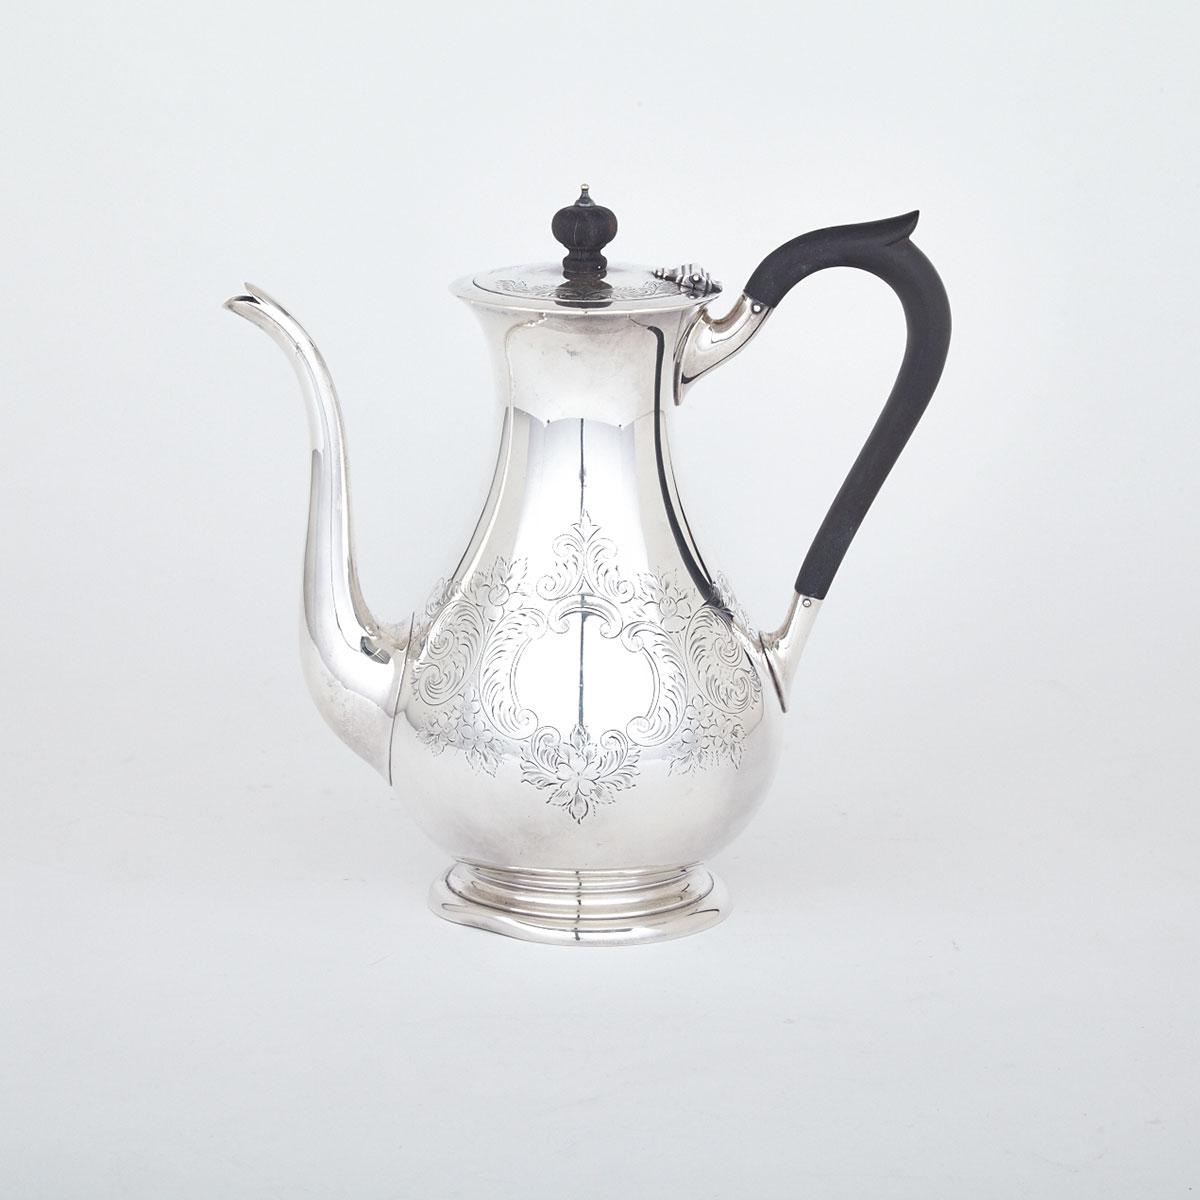 Canadian Silver Coffee Pot, Henry Birks & Sons, Montreal, Que., 20th century